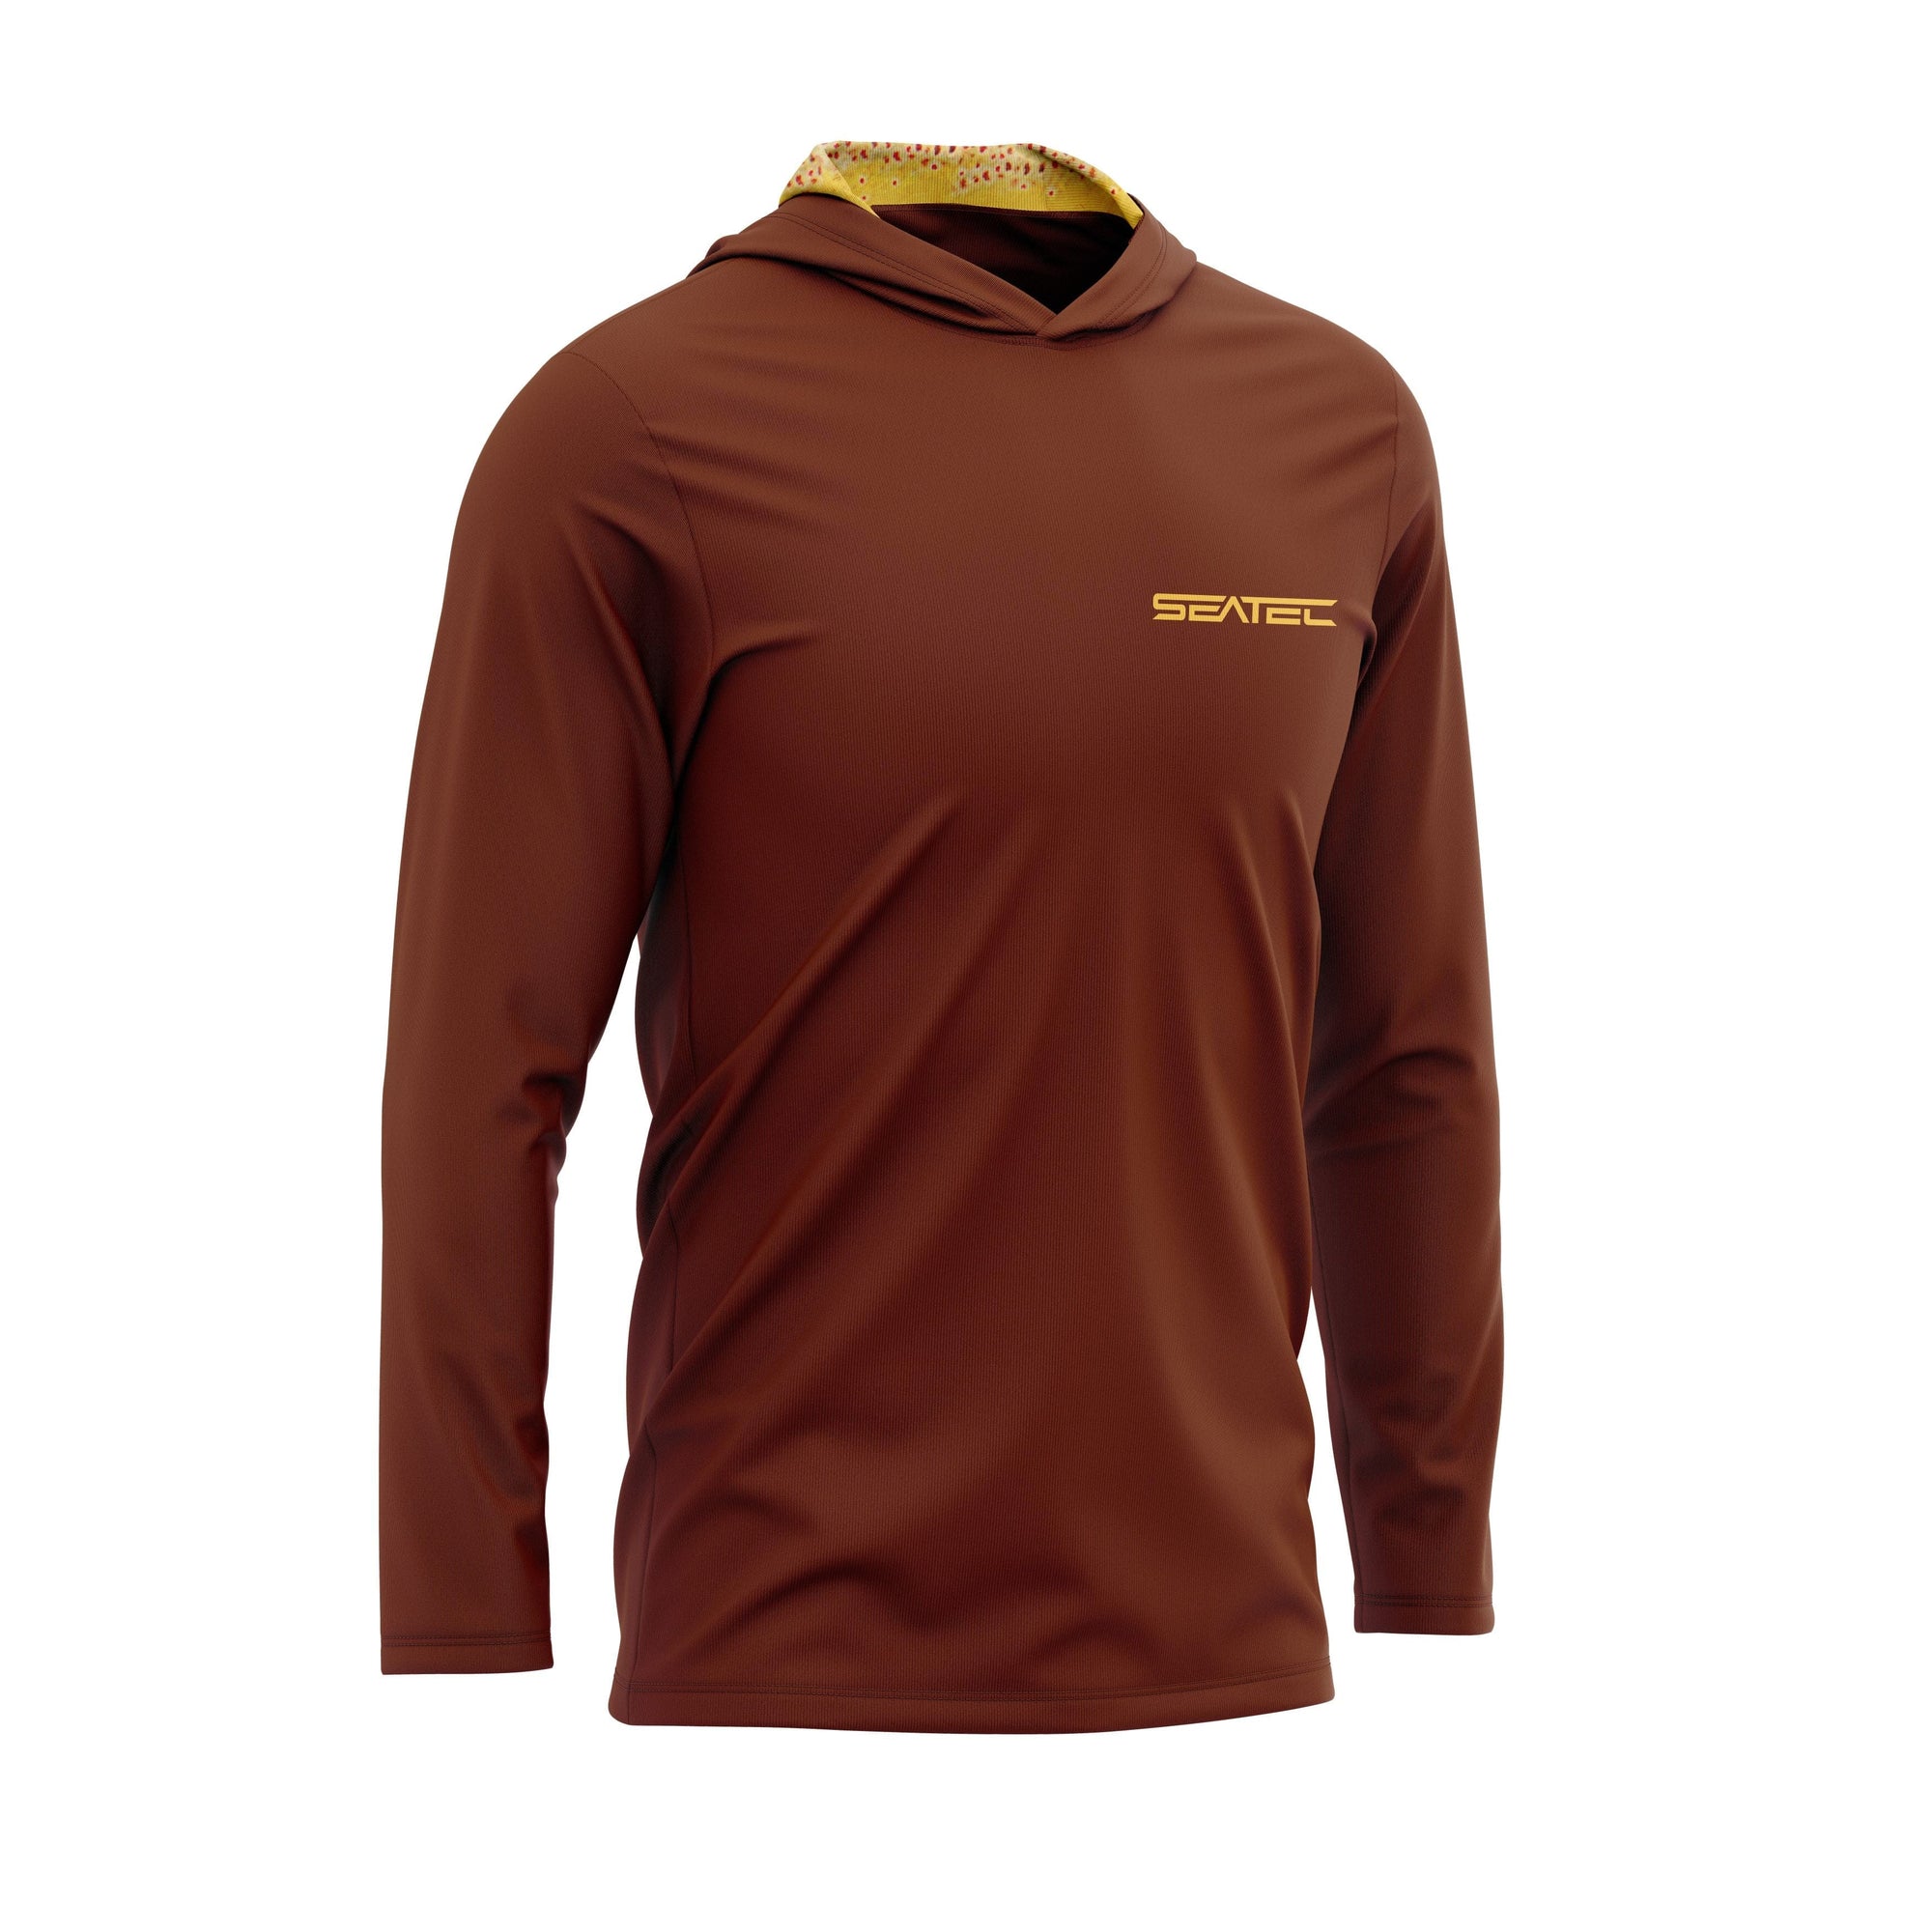 Seatec Outfitters Performance Shirts MEN'S SPORT TEC | MINIMALIST BROWN TROUT | HOODED